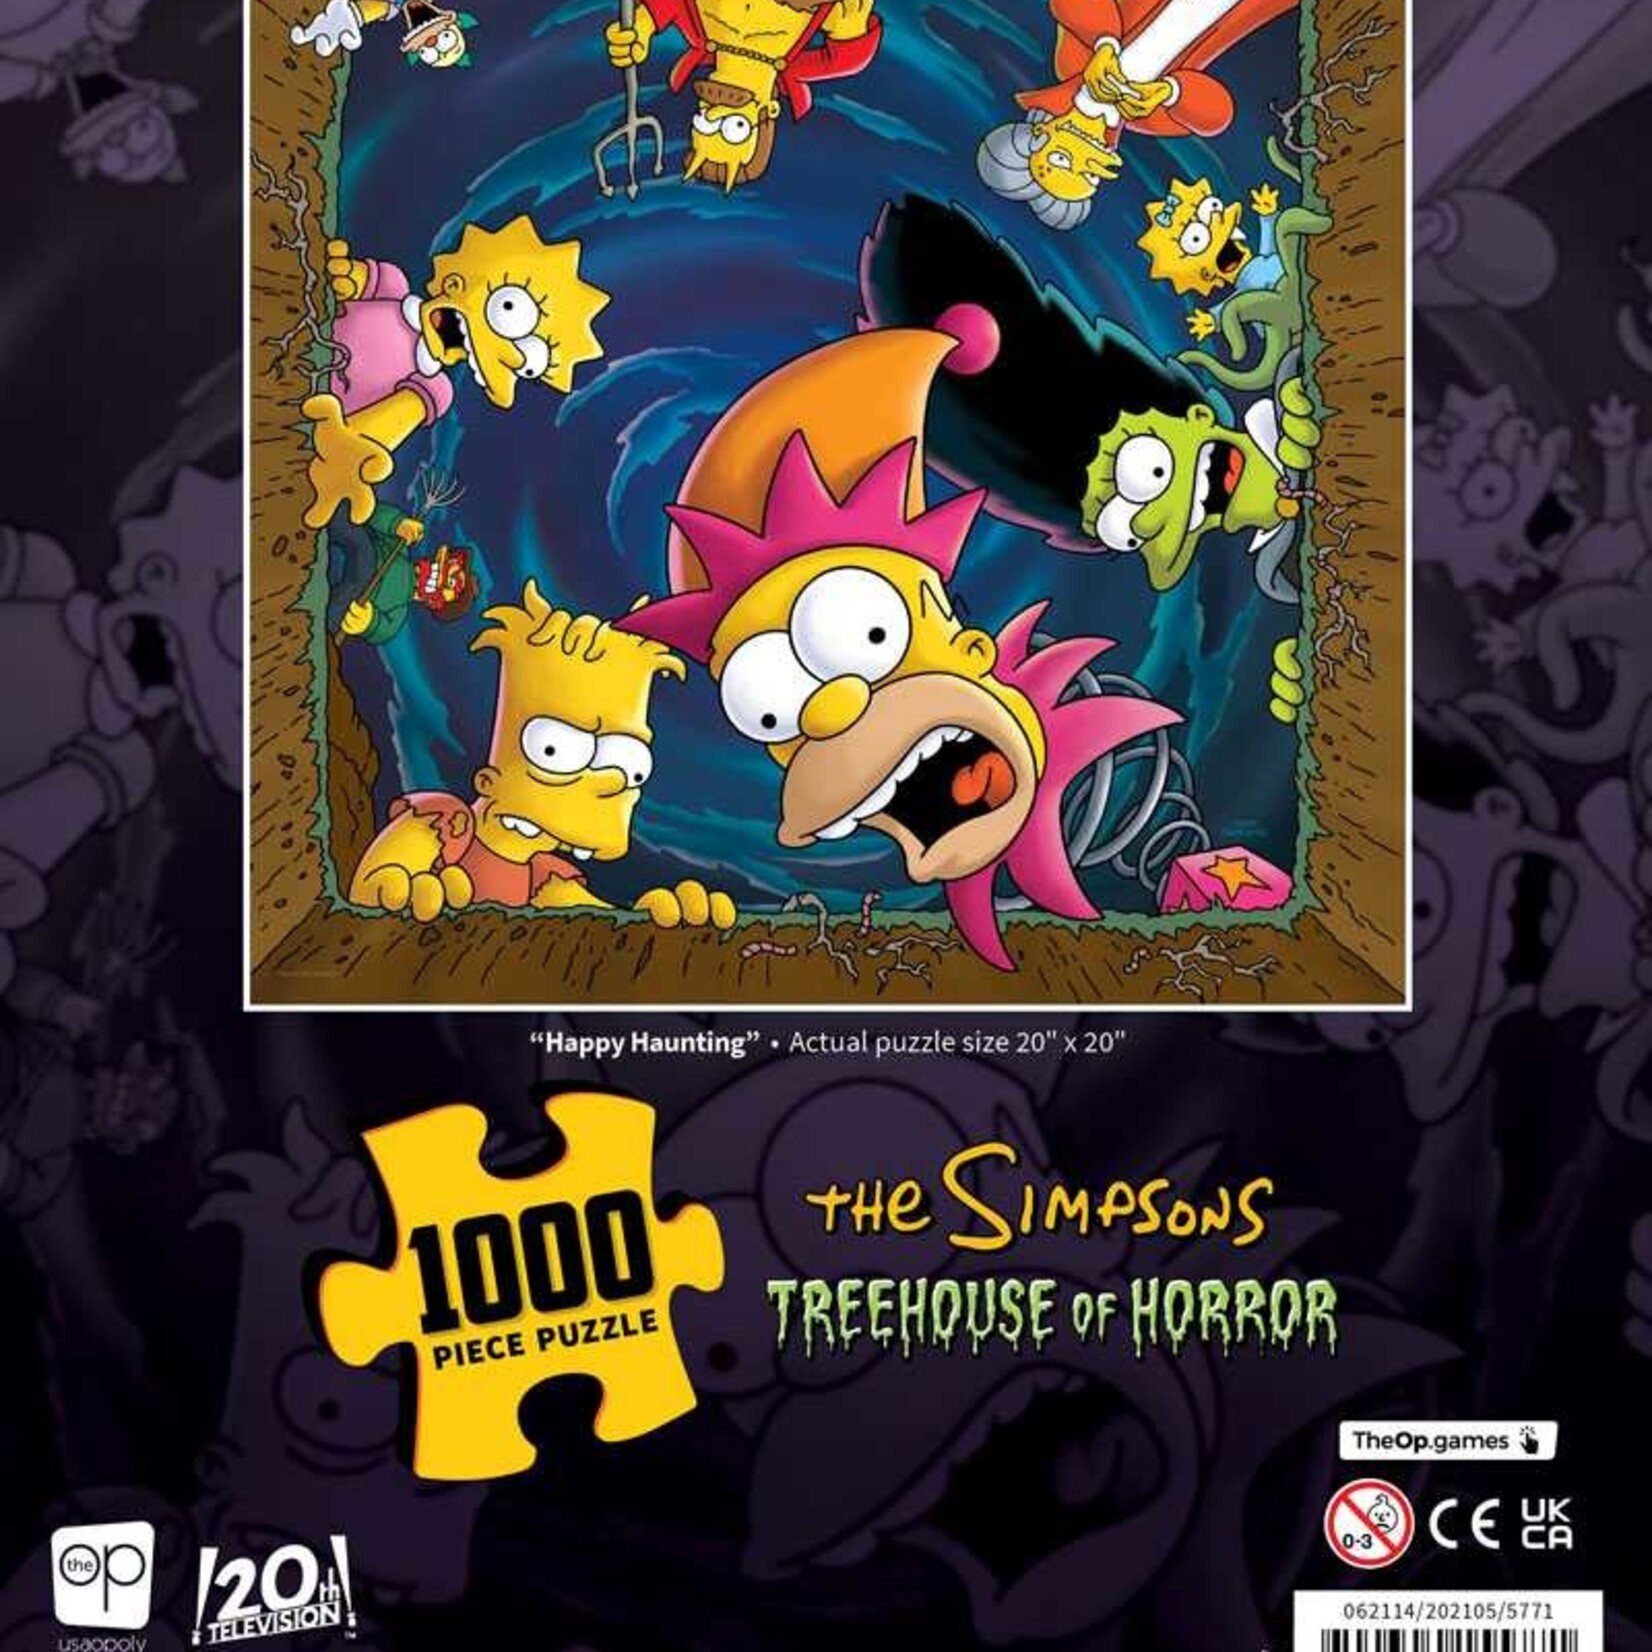 USAopoly USAopoly 1000 - The Simpsons : Treehouse of Horror "Happy Haunting"